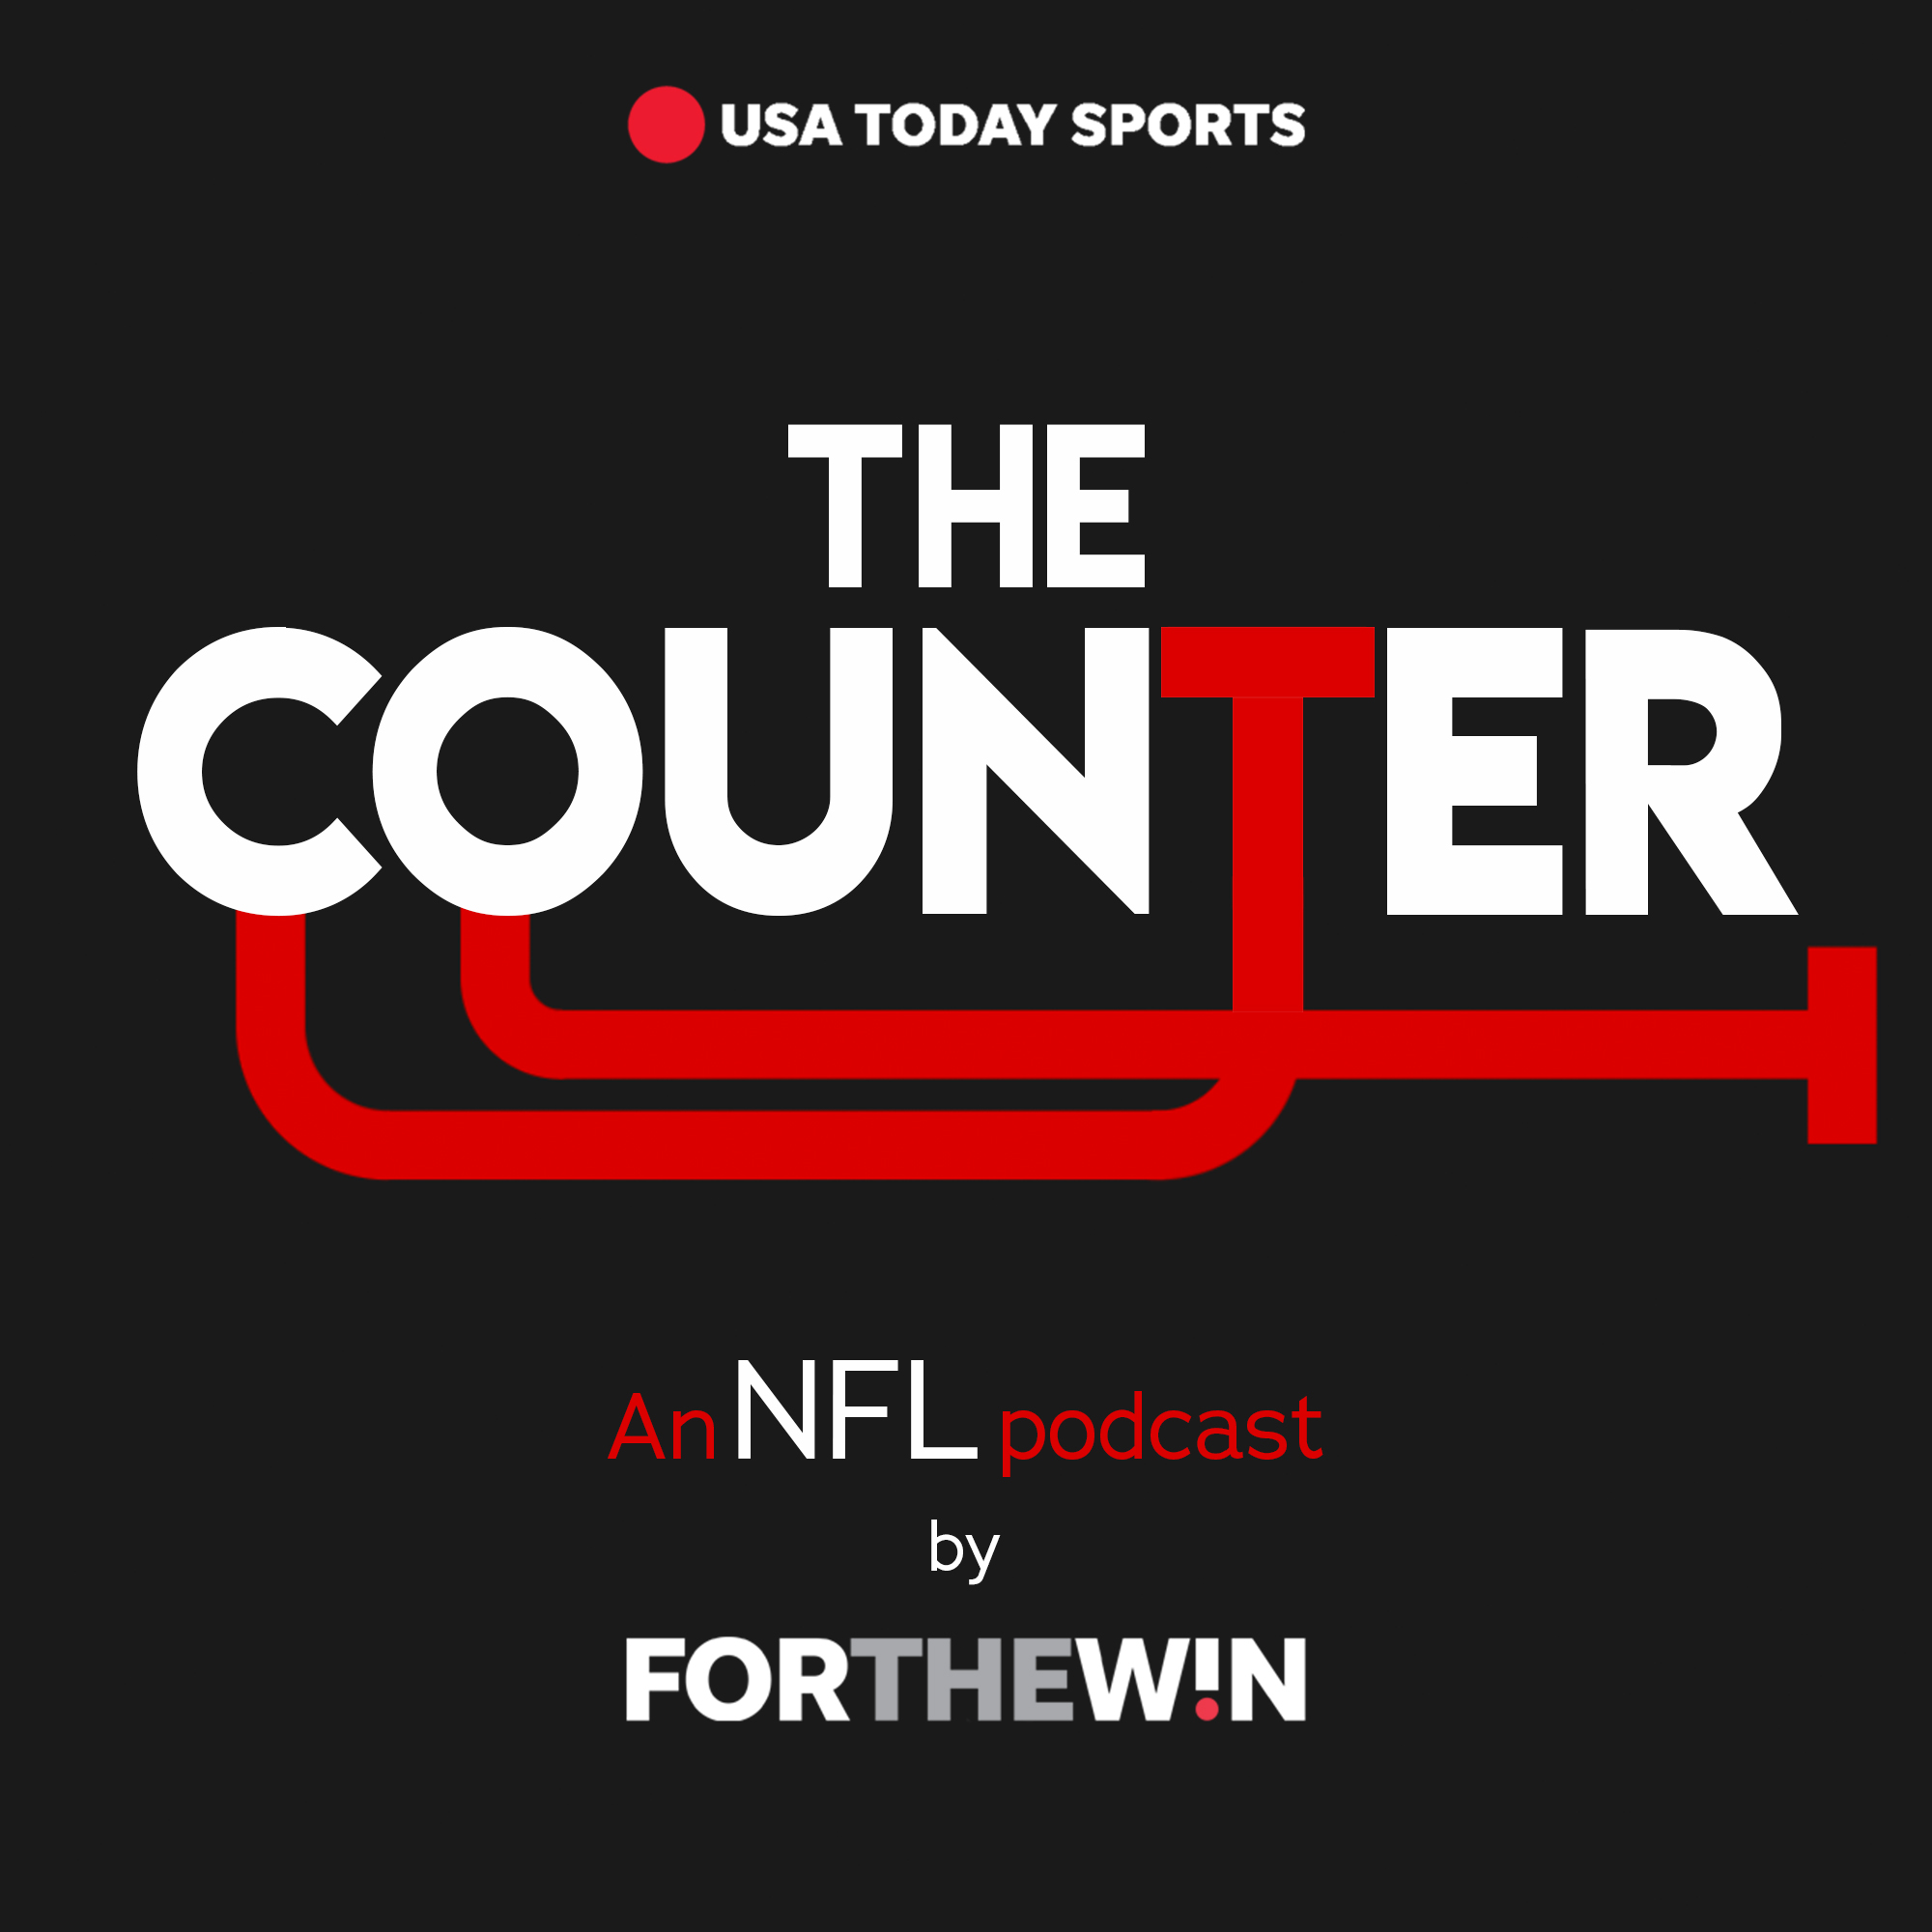 The Counter: An NFL Podcast by For The Win - Thanksgiving Day Games in Review and a look ahead to Sunday